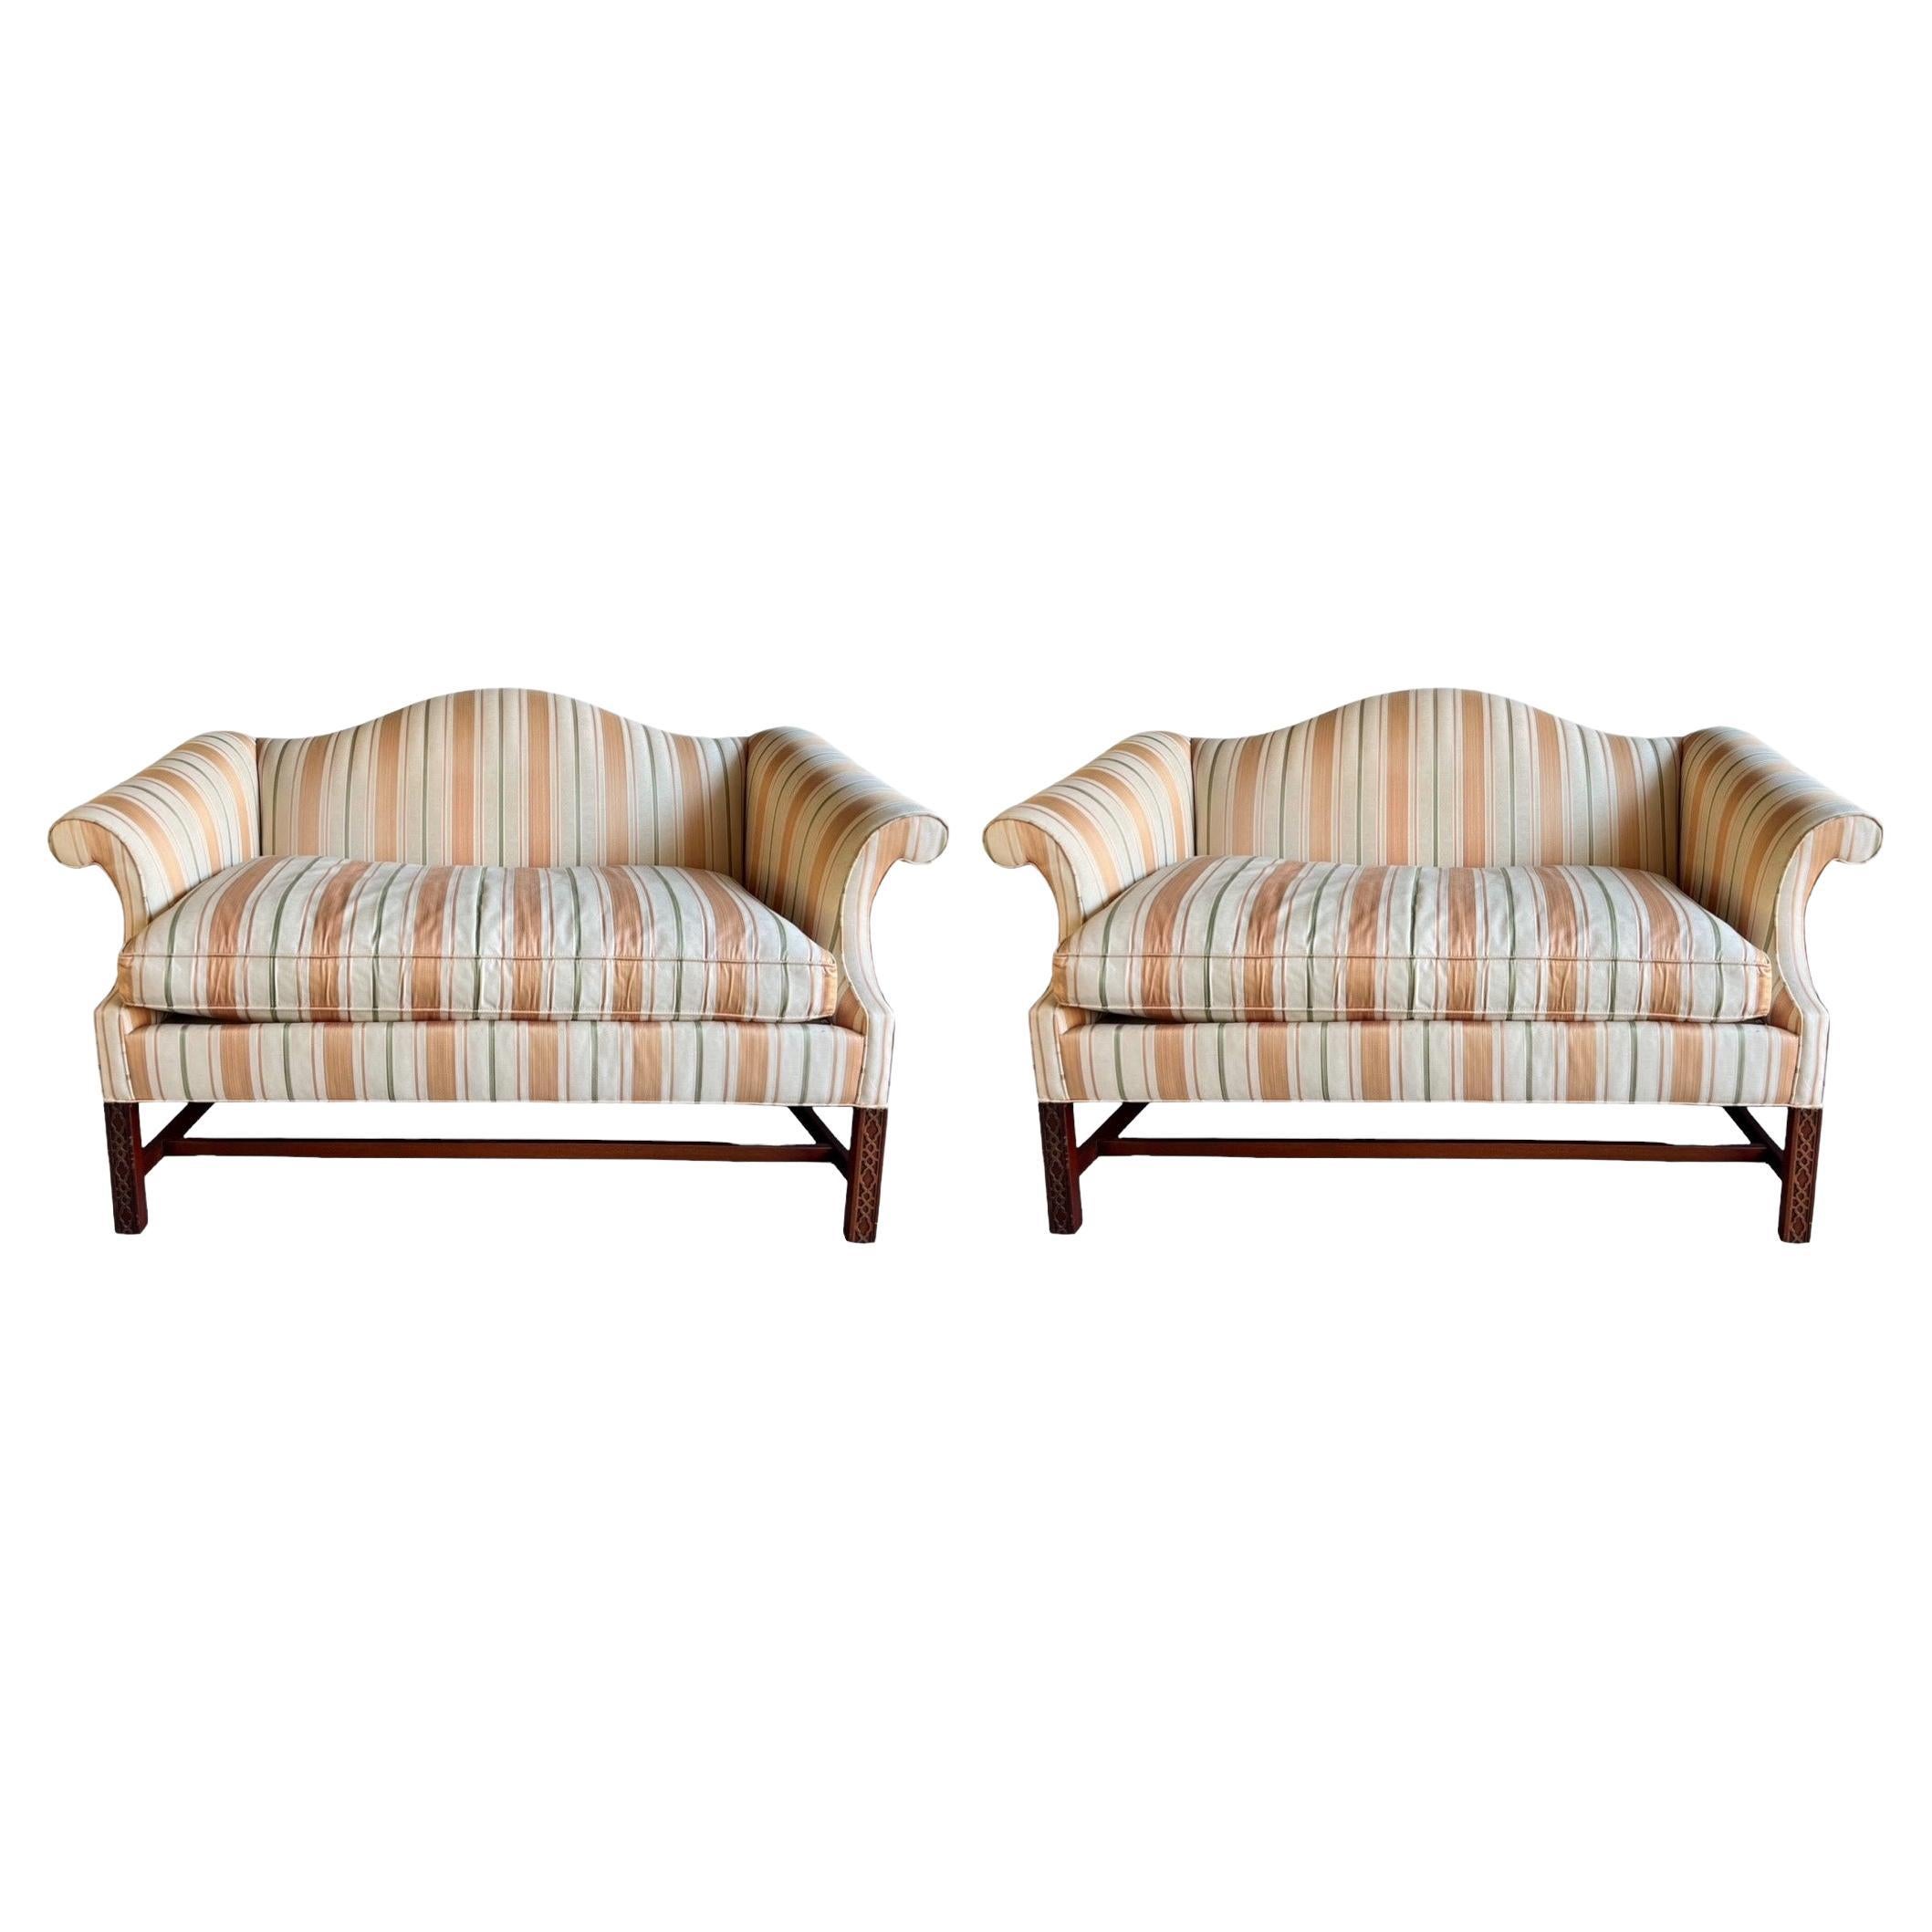 Chinese Chippendale Style Settees / Sofas W/ Mahogany Frame By Southwood - Pair